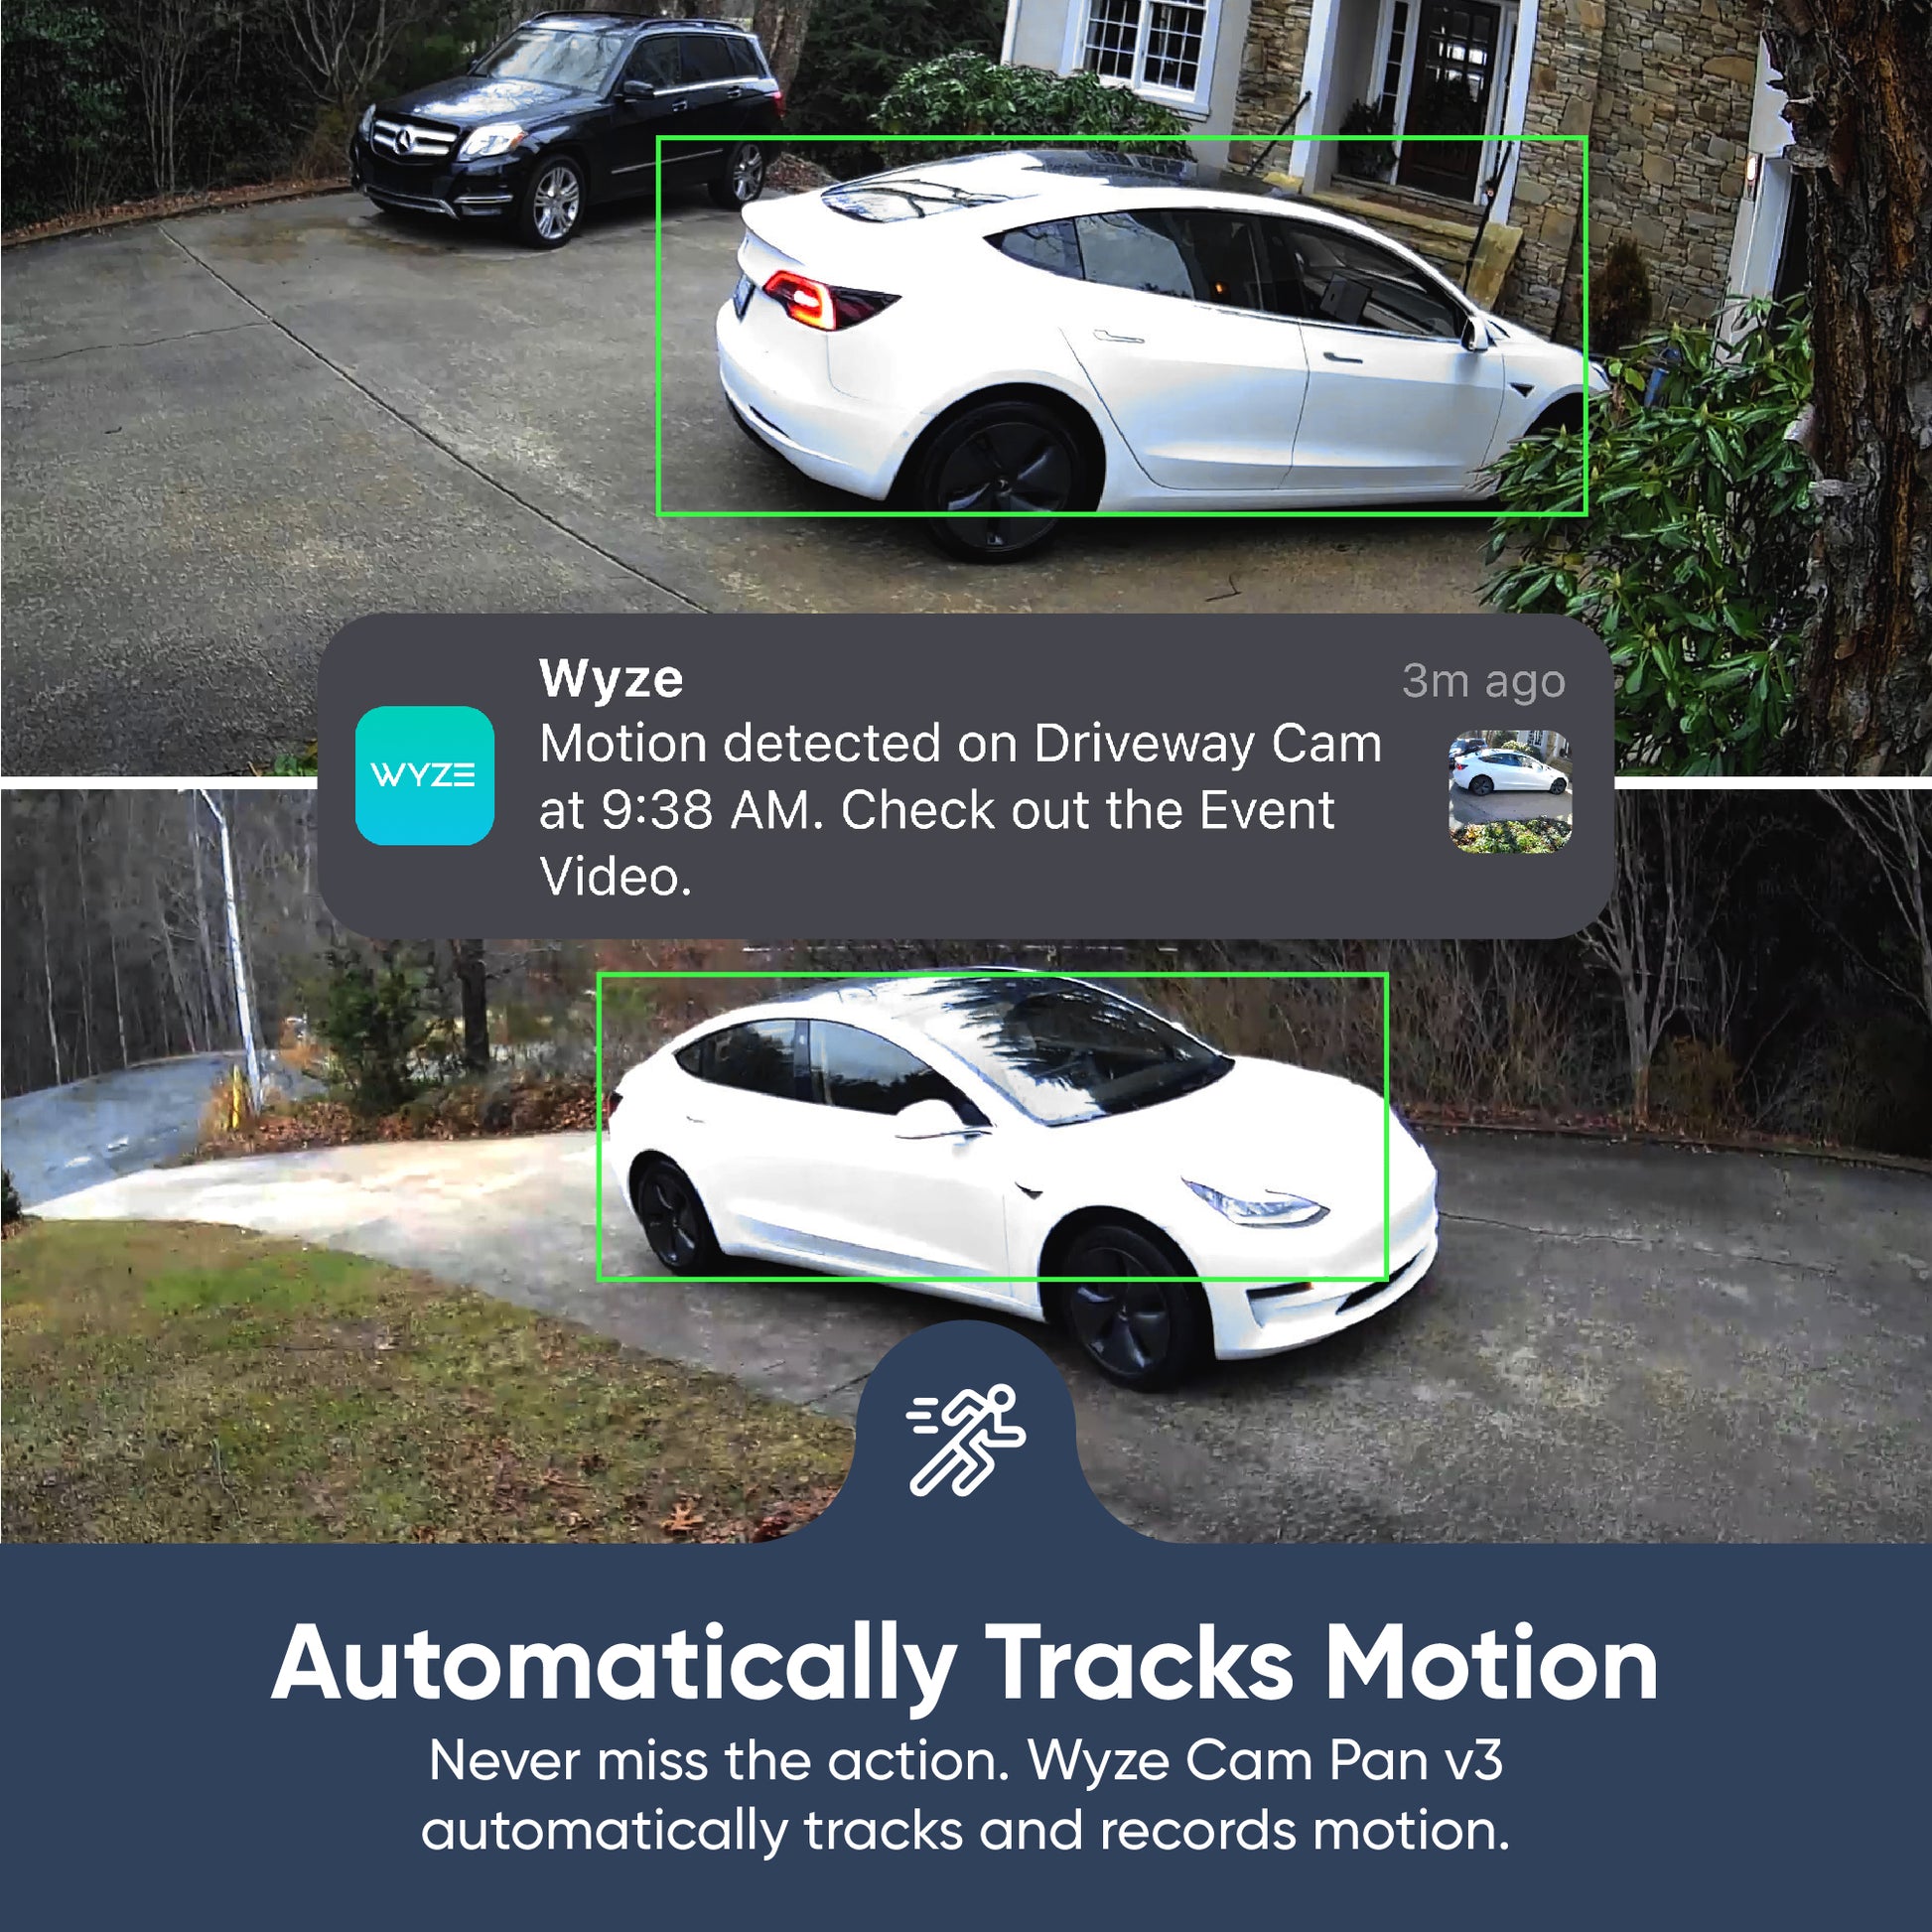 Text overlay "Automatically Tracks Motion." Car pulling in the driveway in the bottom image and top image shows car parked.